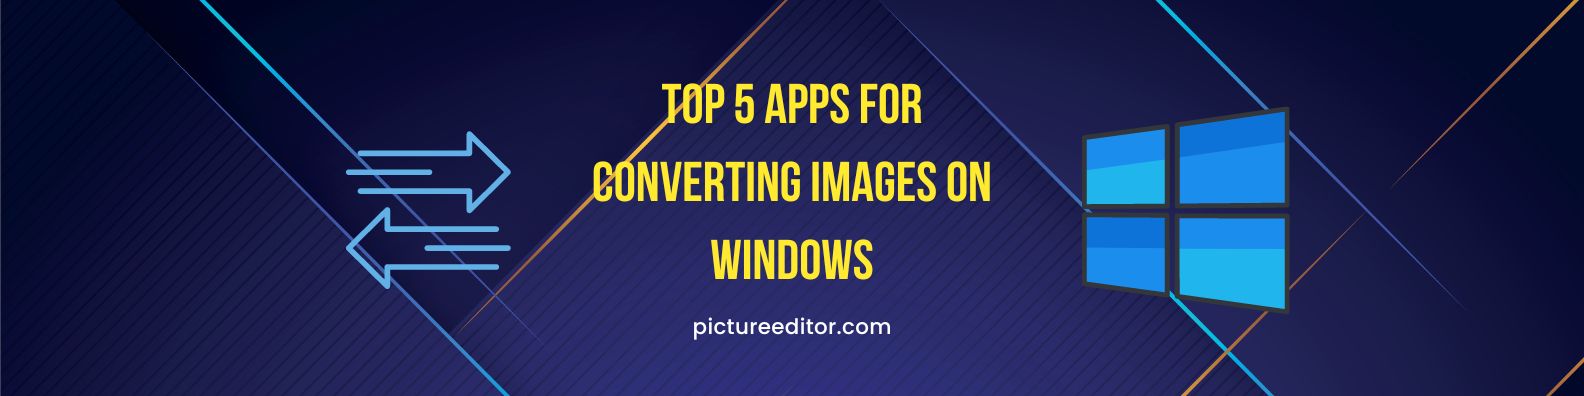 Top 5 Apps for Converting Images on Windows